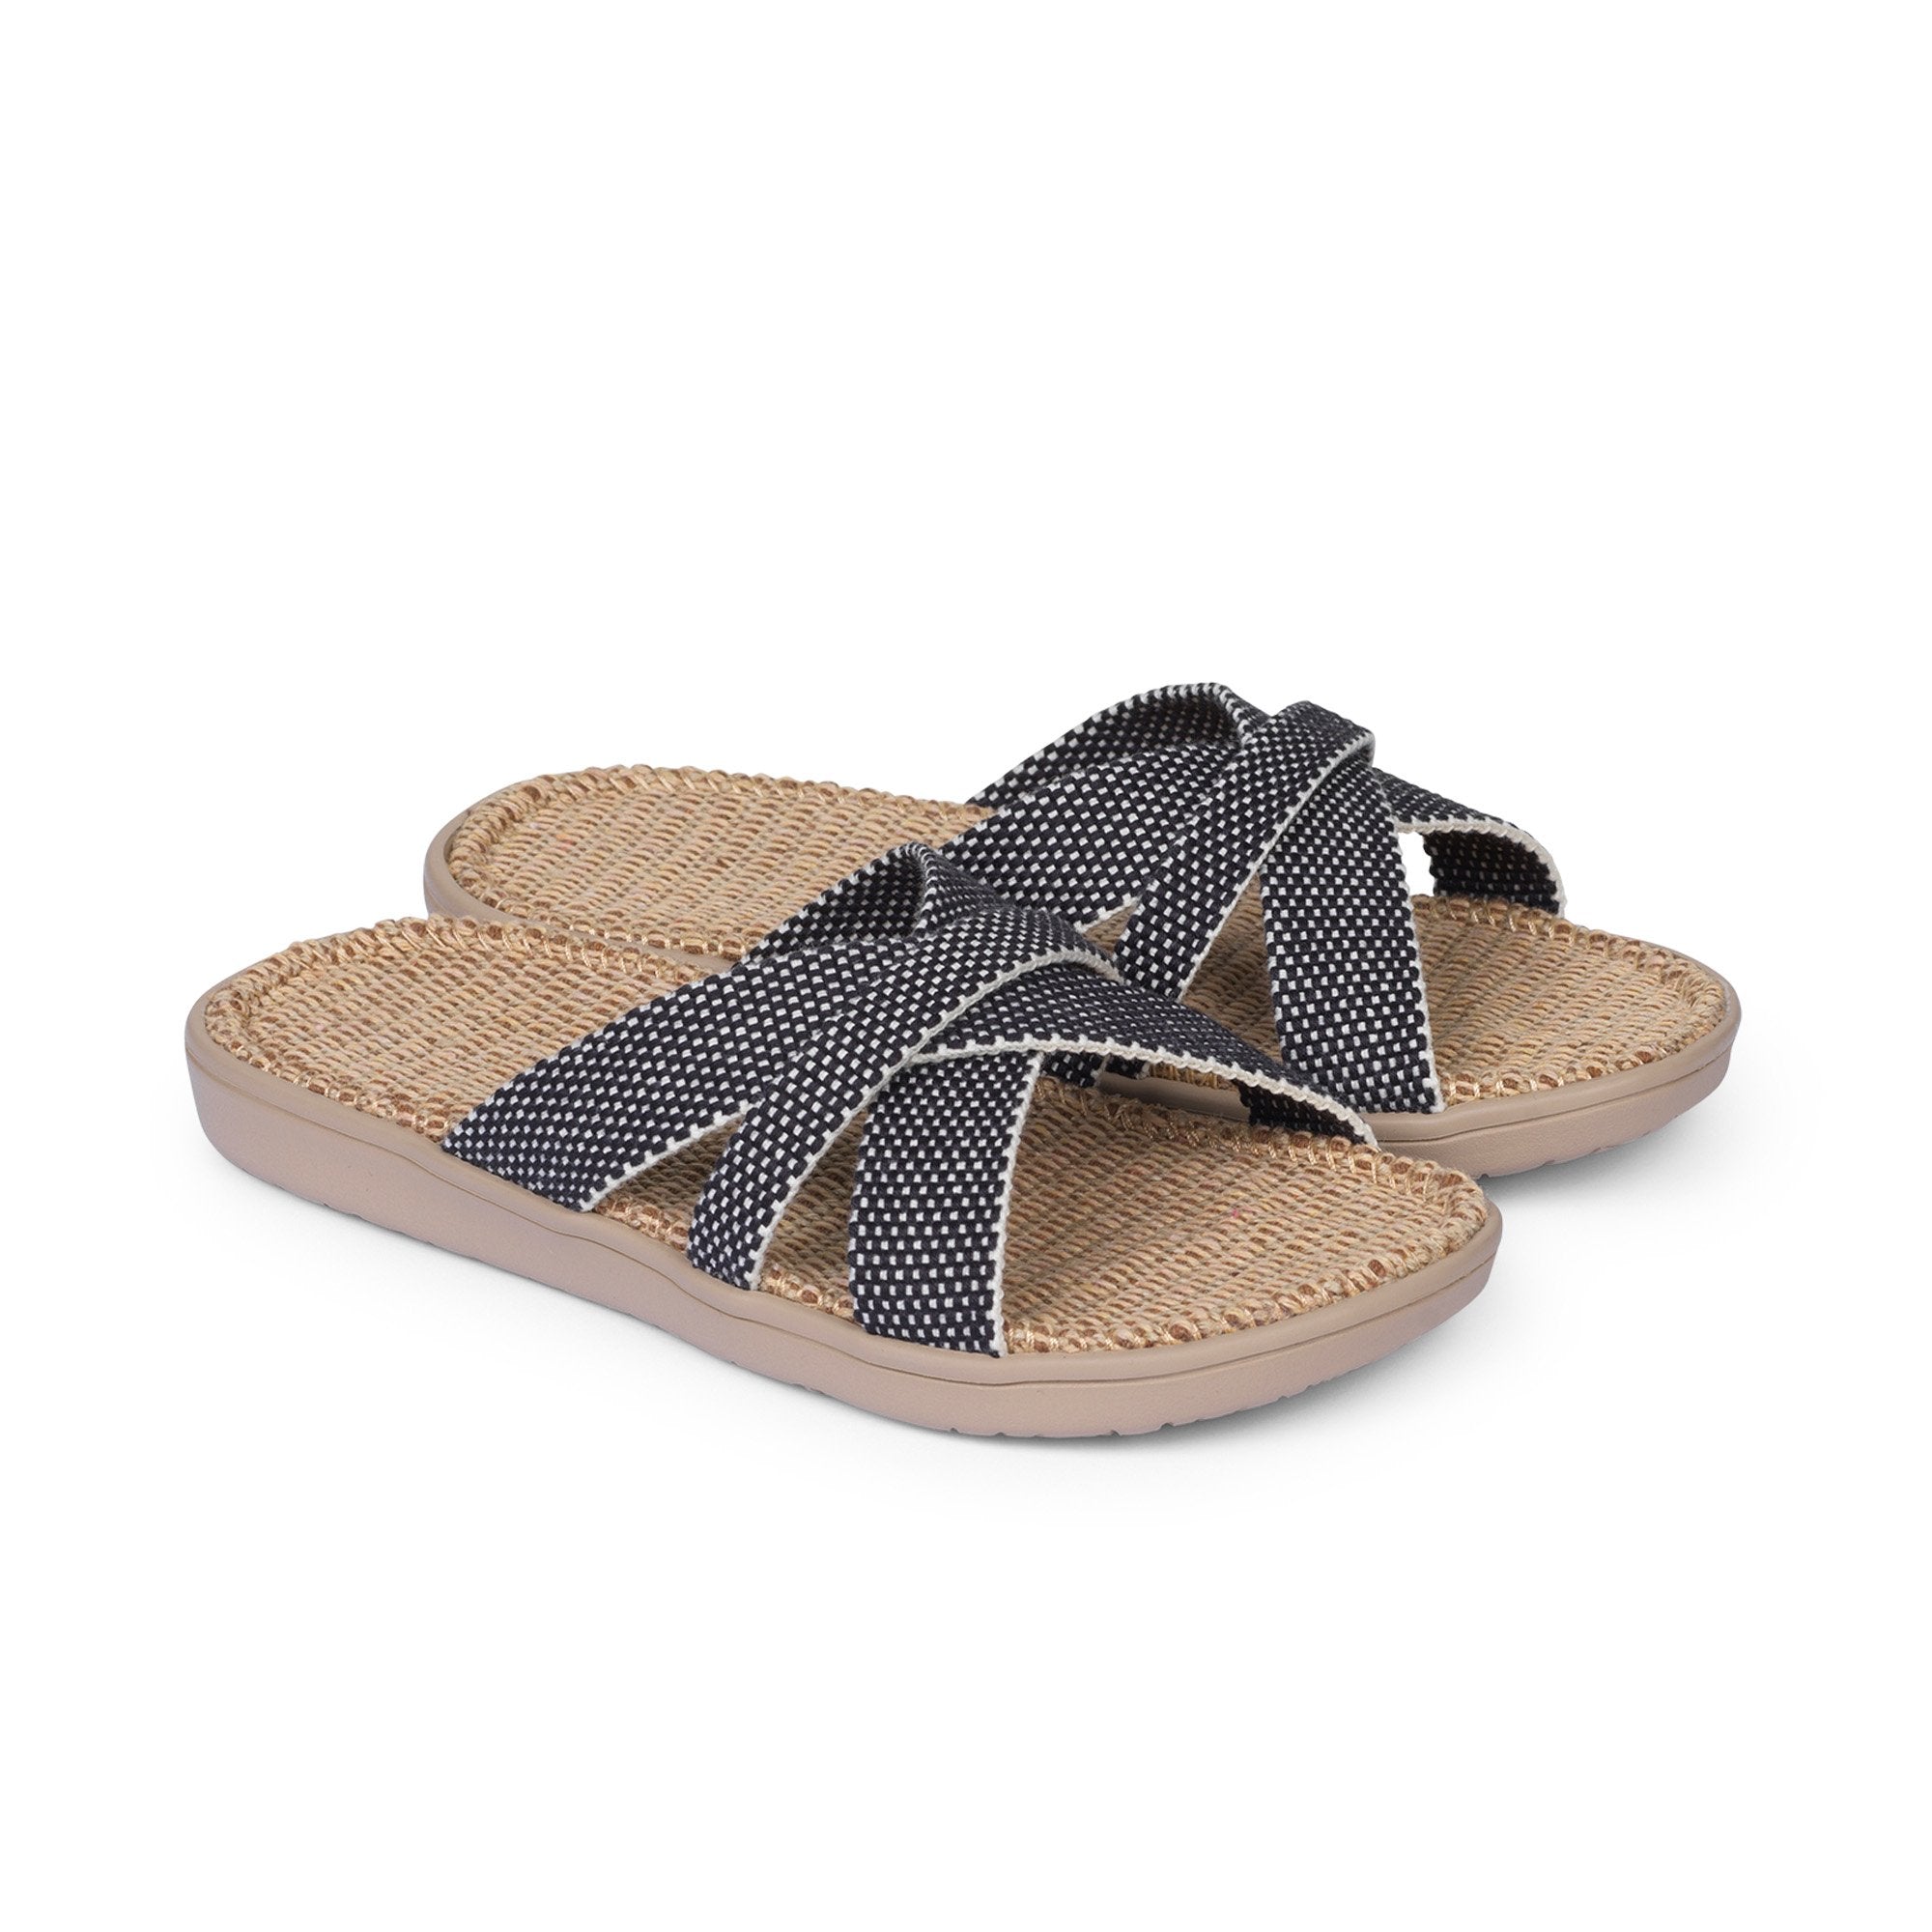 Sandals with straps of soft cotton. The comfortable inner sole in covered with jute